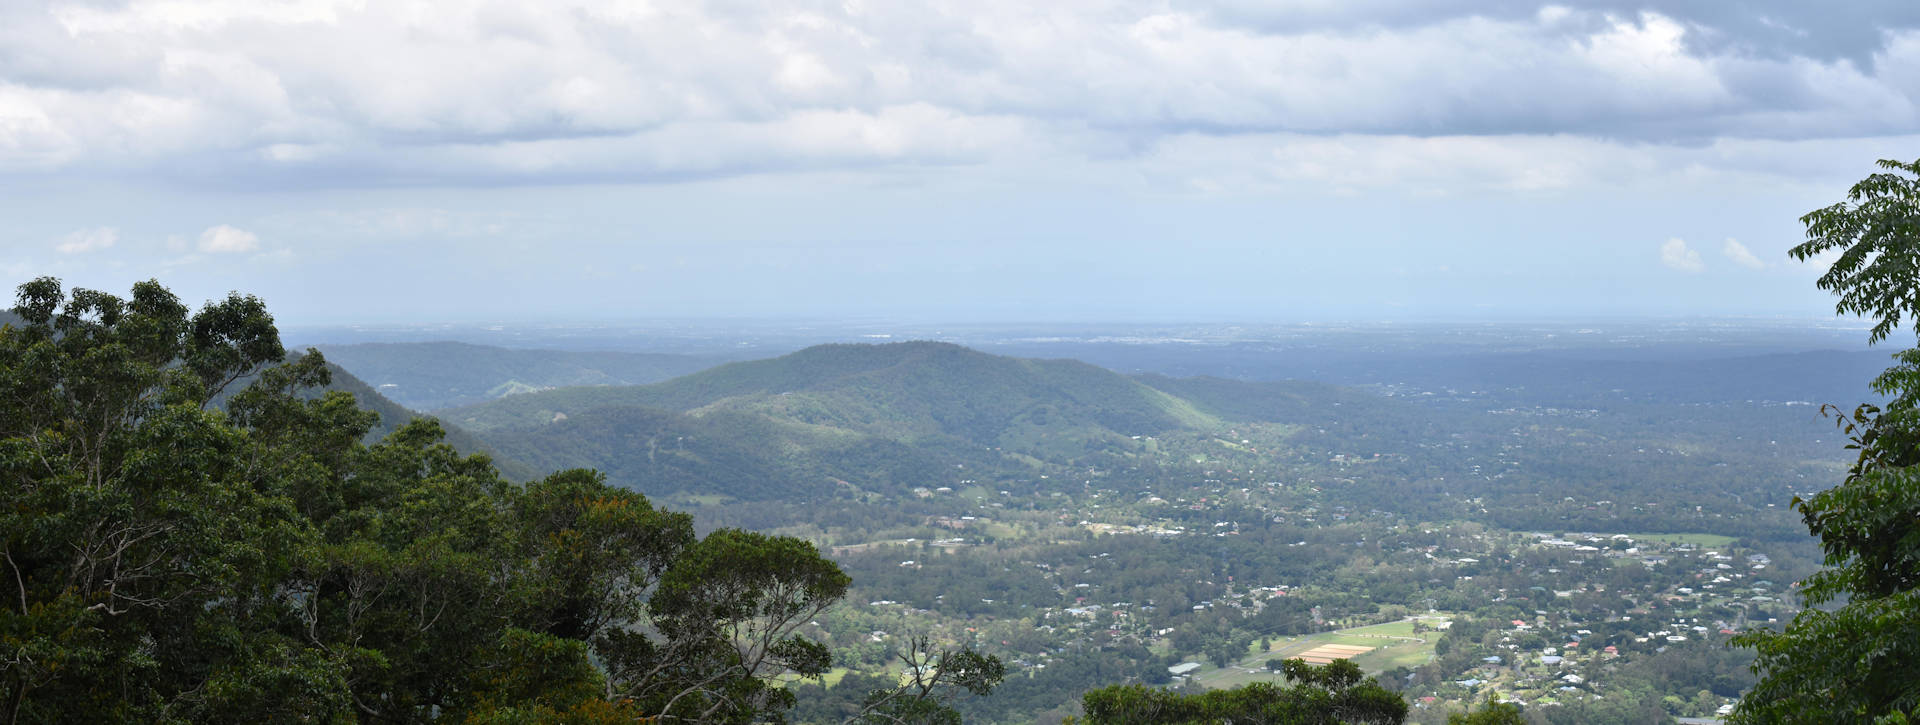 Mount Nebo Lookout at the end of the Morelia Walking Track, at Marorina in the D'Aguilar National Park